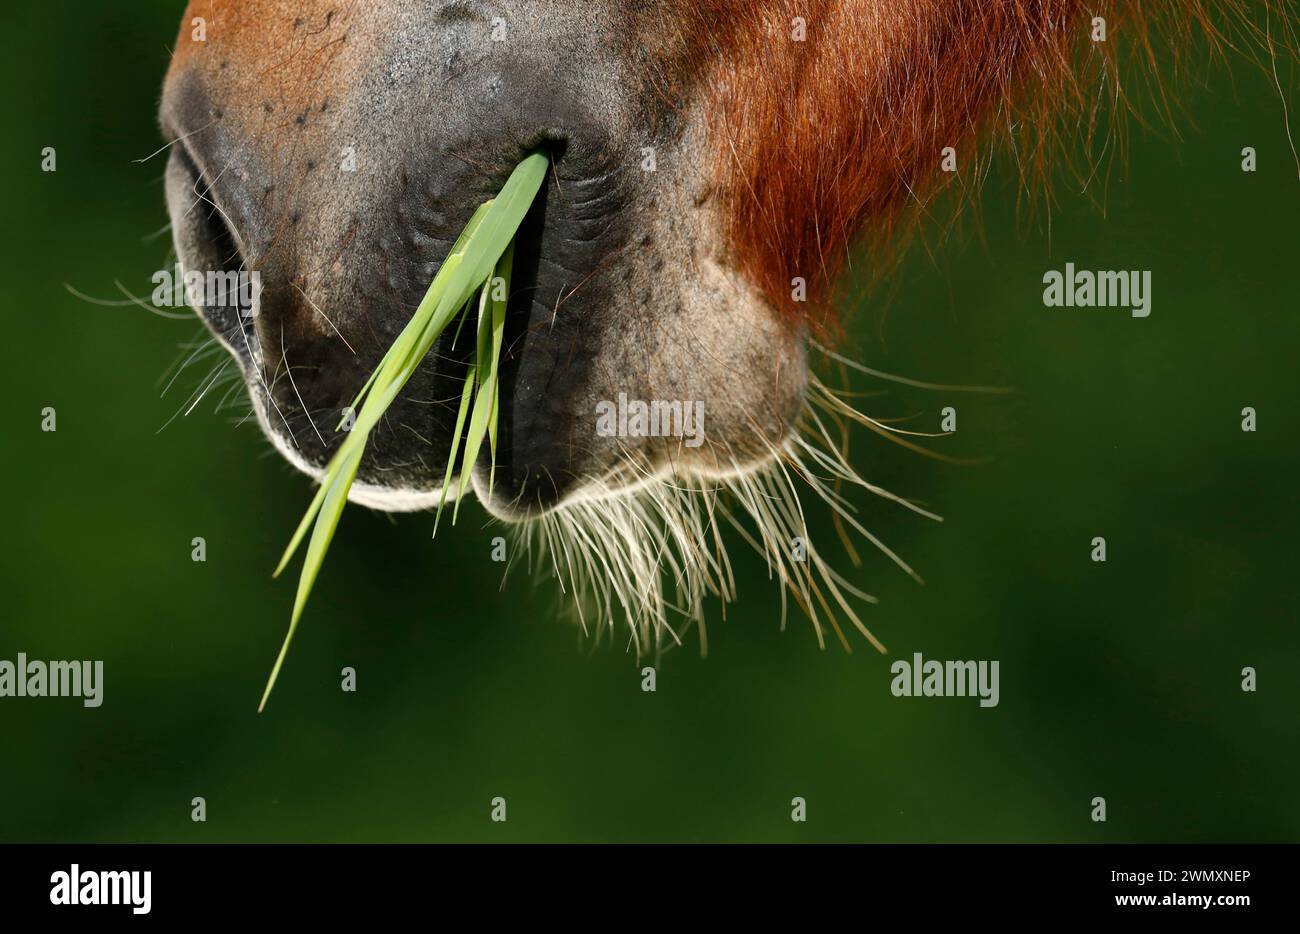 Icelandic Horse eating grass, close-up of mouth. Germany Stock Photo